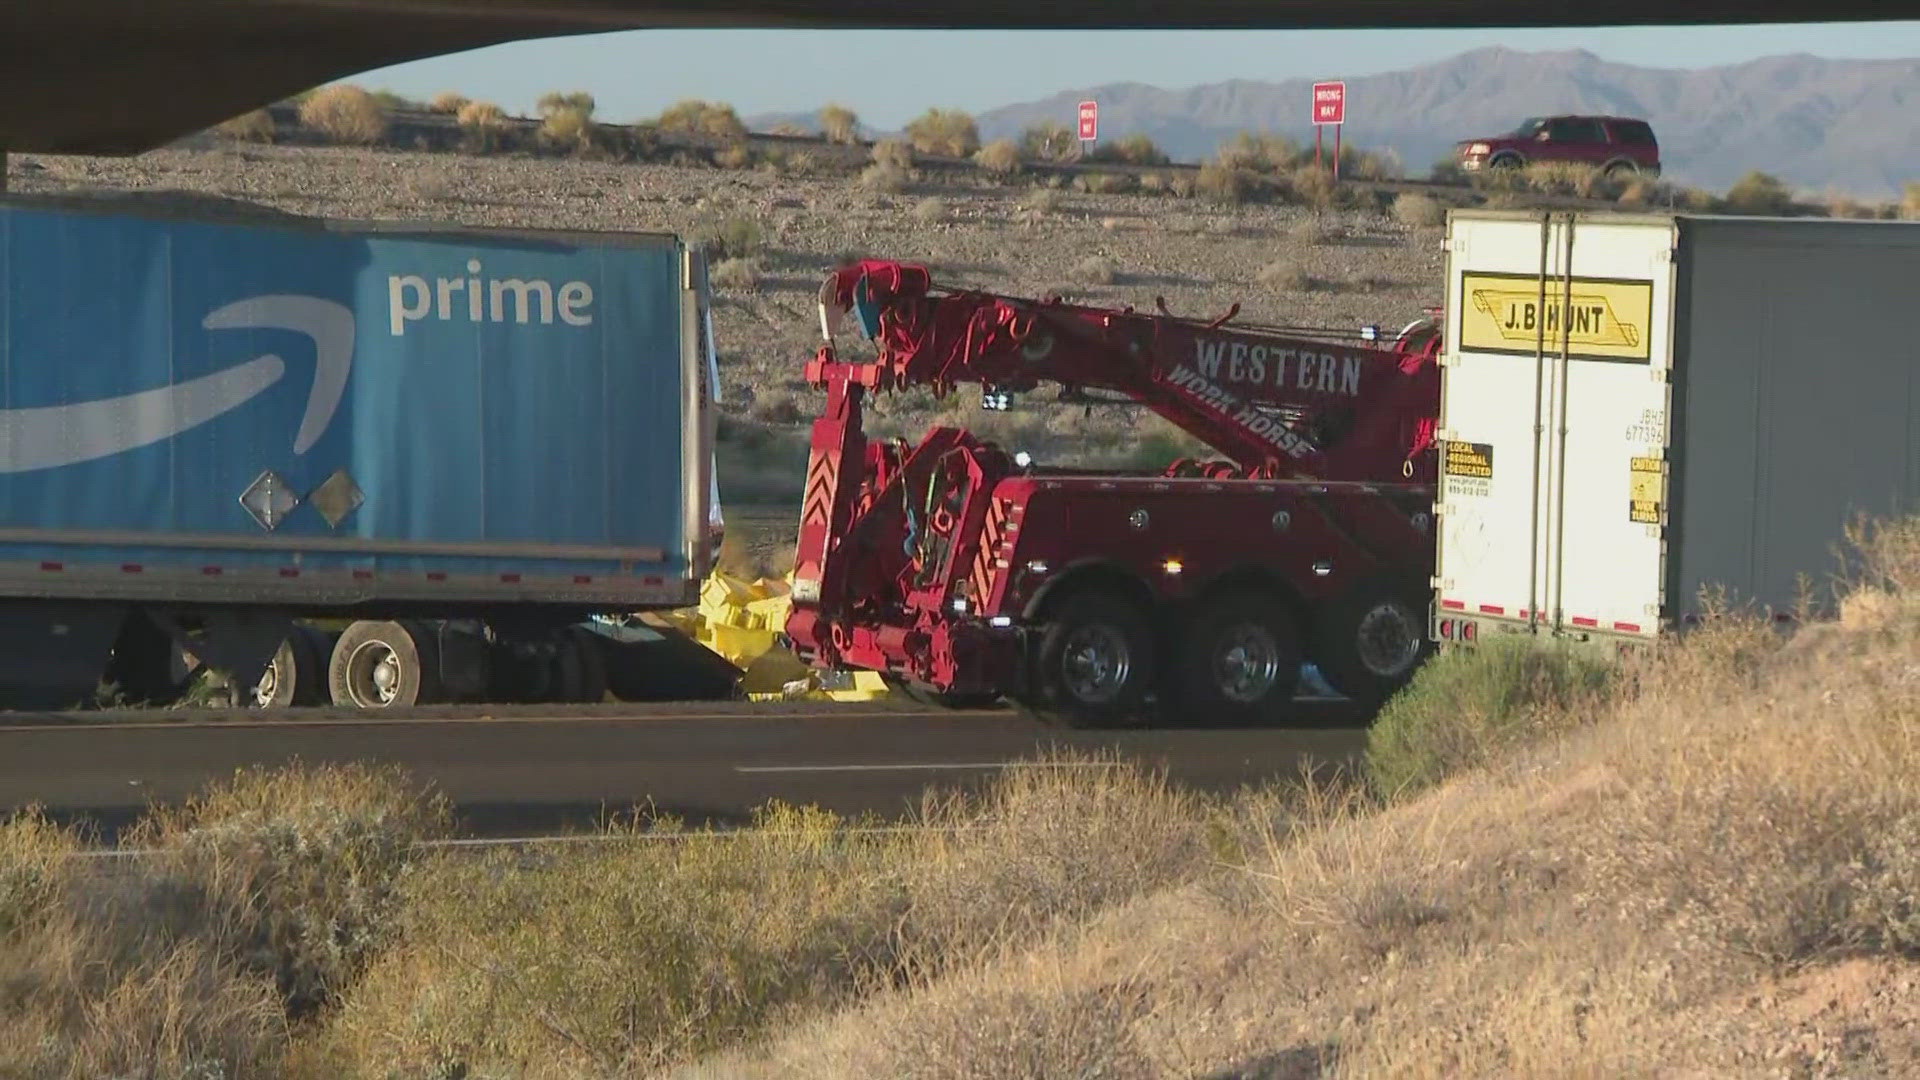 A driver and co-driver were on board the truck at the time of the crash, AZDPS said.